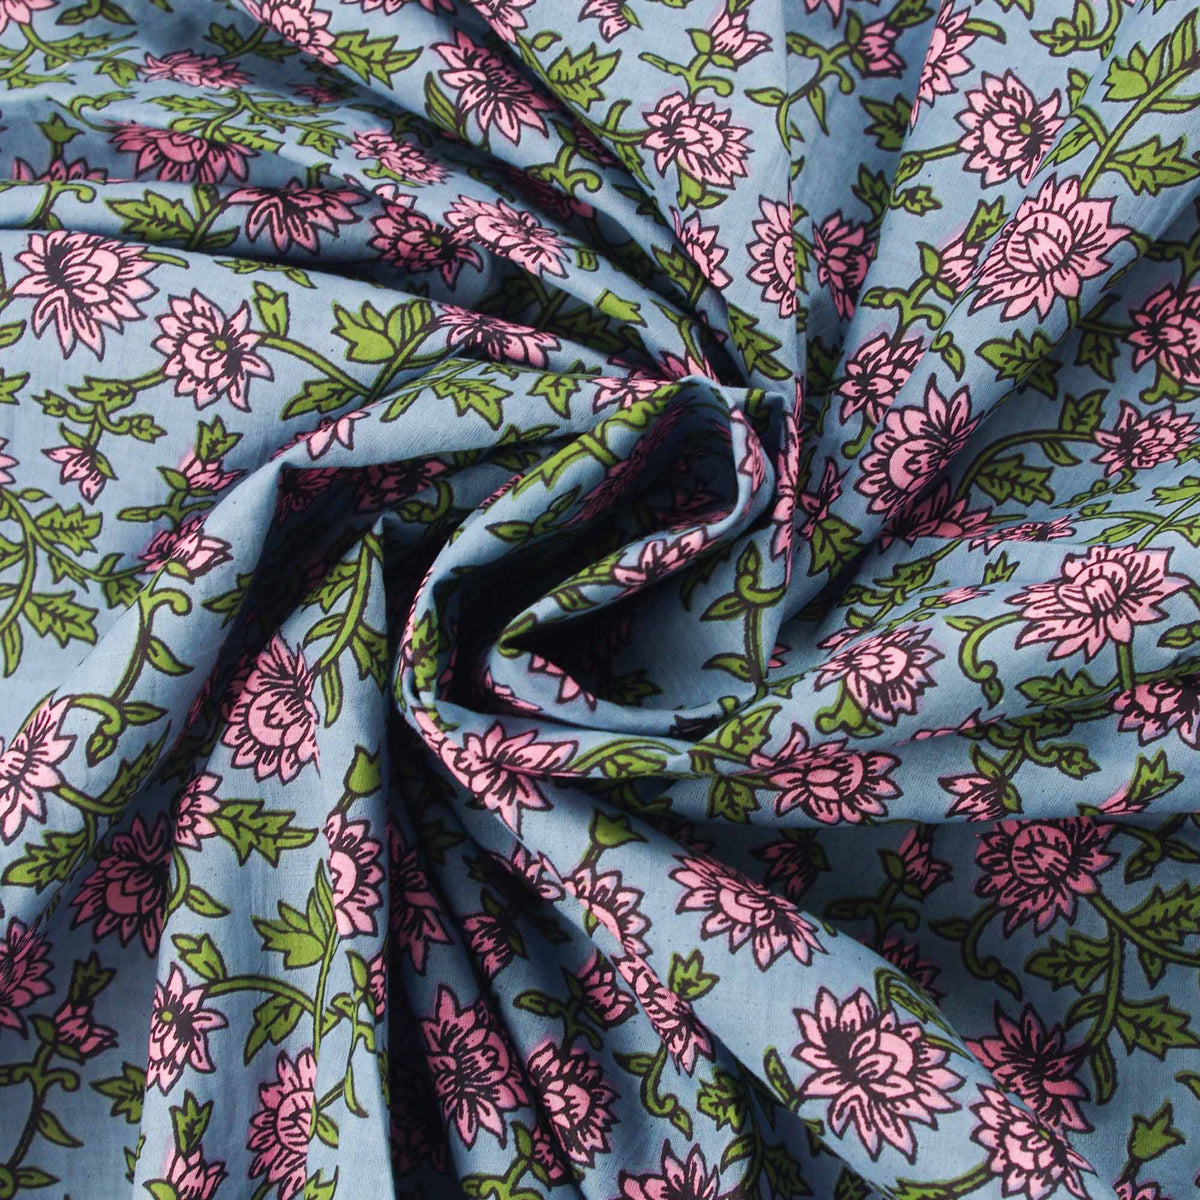 Hand Screen Printed 100% Cotton Fabric -Pink Floral Jaal On Blue (Design 369)